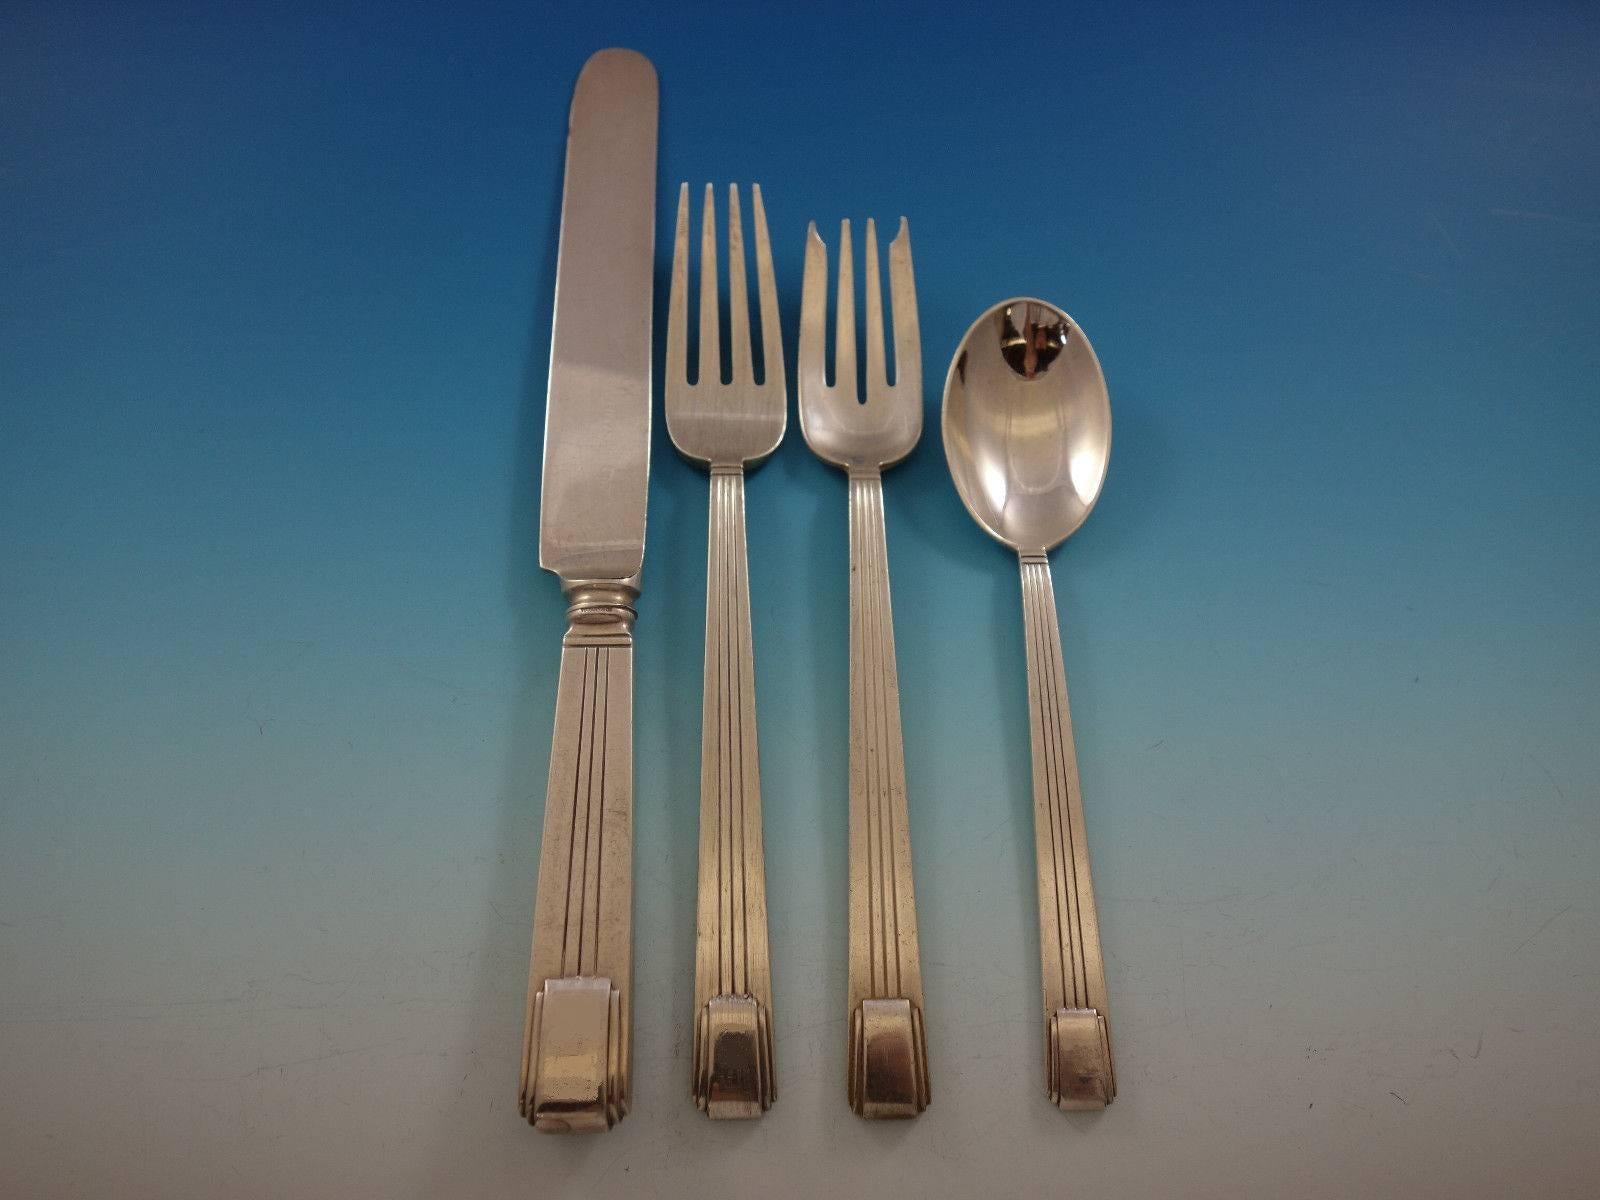 Century by Tiffany & Co sterling silver flatware set of 59 pieces. This set includes: Eight knives, 9